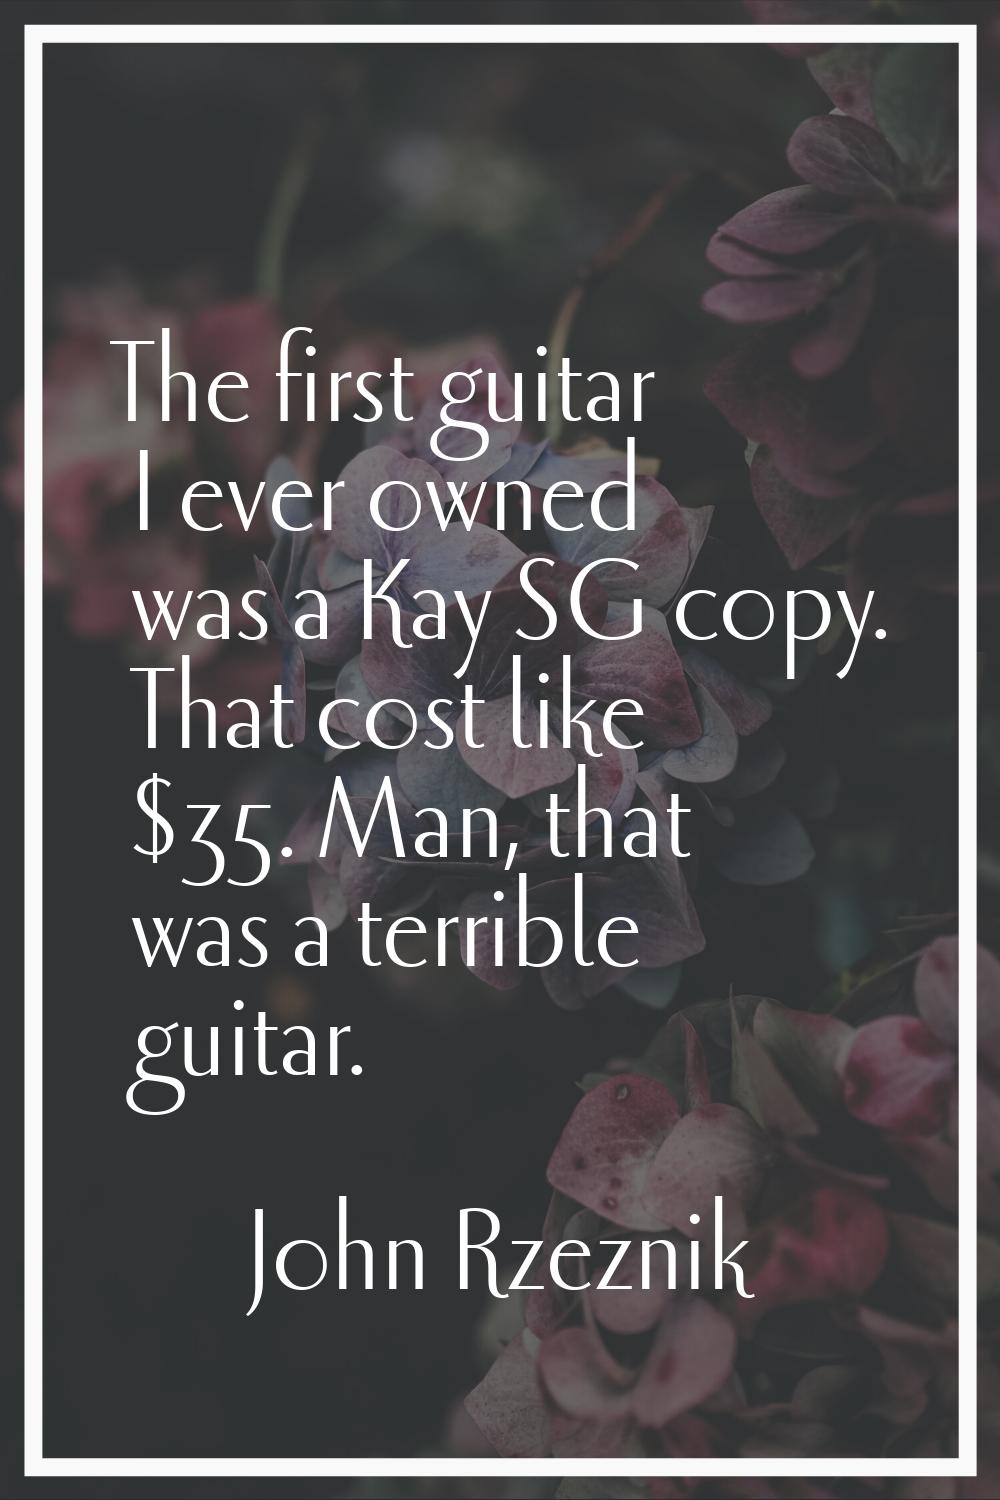 The first guitar I ever owned was a Kay SG copy. That cost like $35. Man, that was a terrible guita